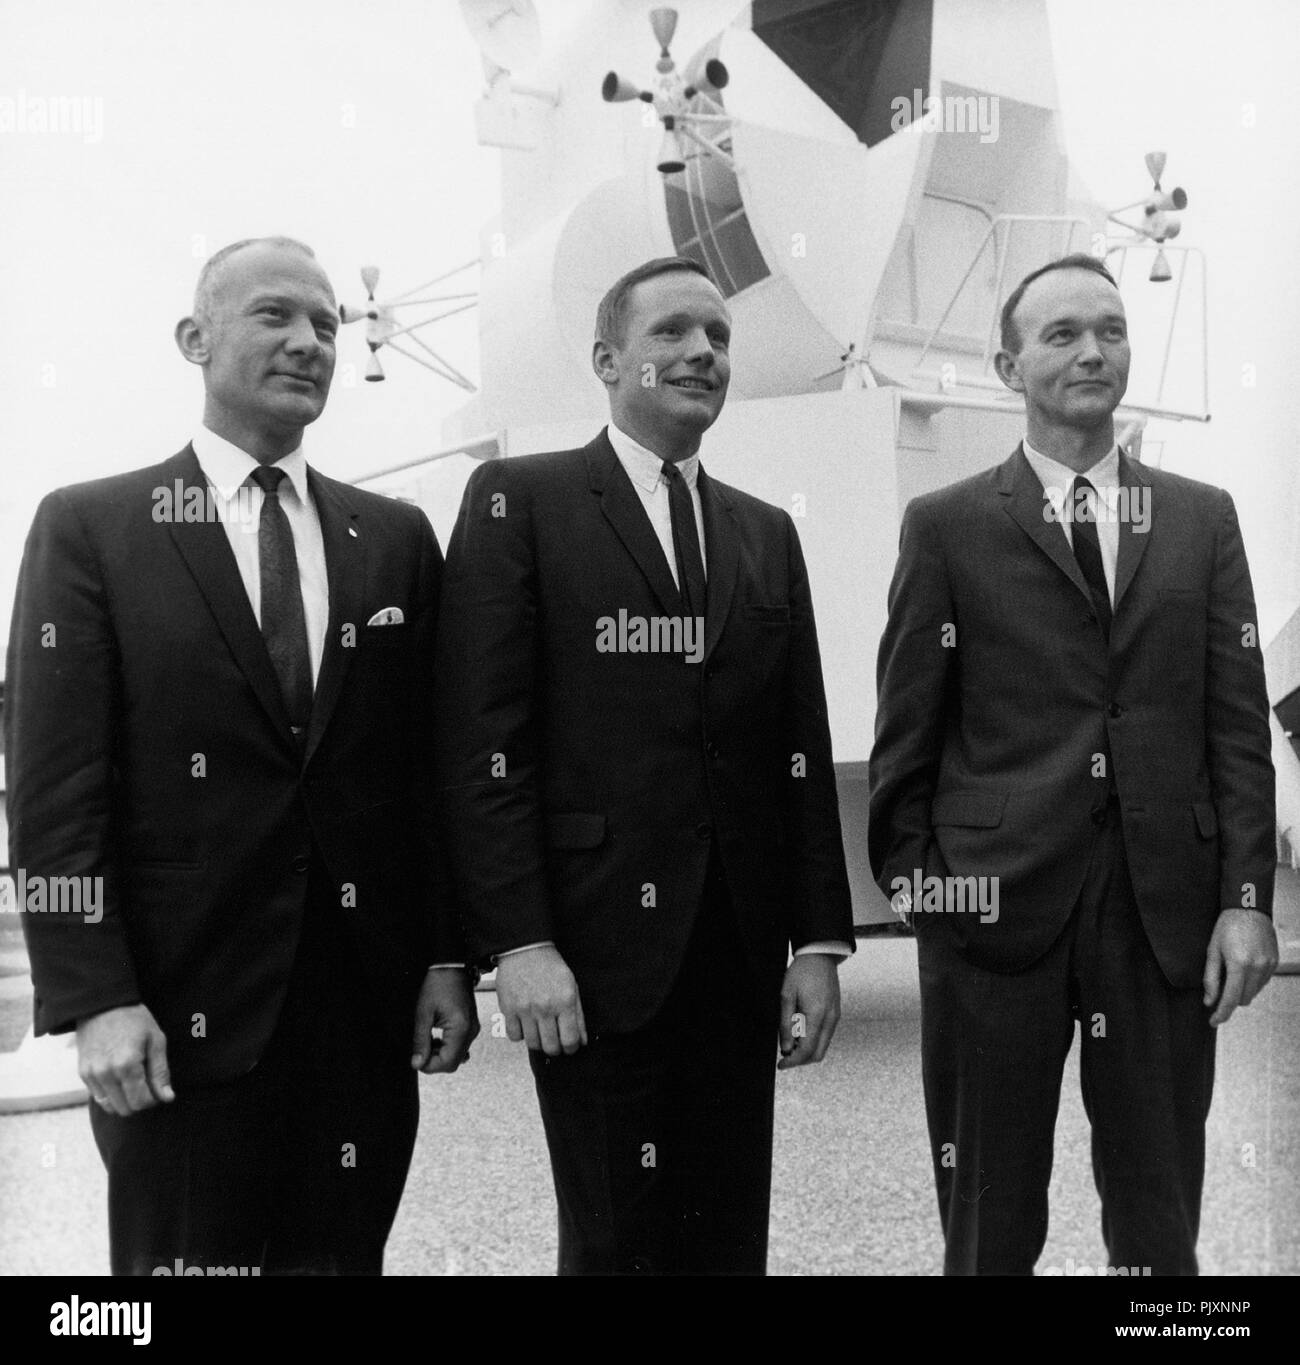 Cape Canaveral, FL - (FILE) -- Apollo 11 Astronauts, left-to-right, Edwin E. 'Buzz' Aldrin, Jr., Neil A. Armstrong, and Michael Collins, pose in front of full-scale lunar module mock-up similar to the spacecraft that took them to the Moon on February 28, 1969. Credit: NASA via CNP /MediaPunch Stock Photo